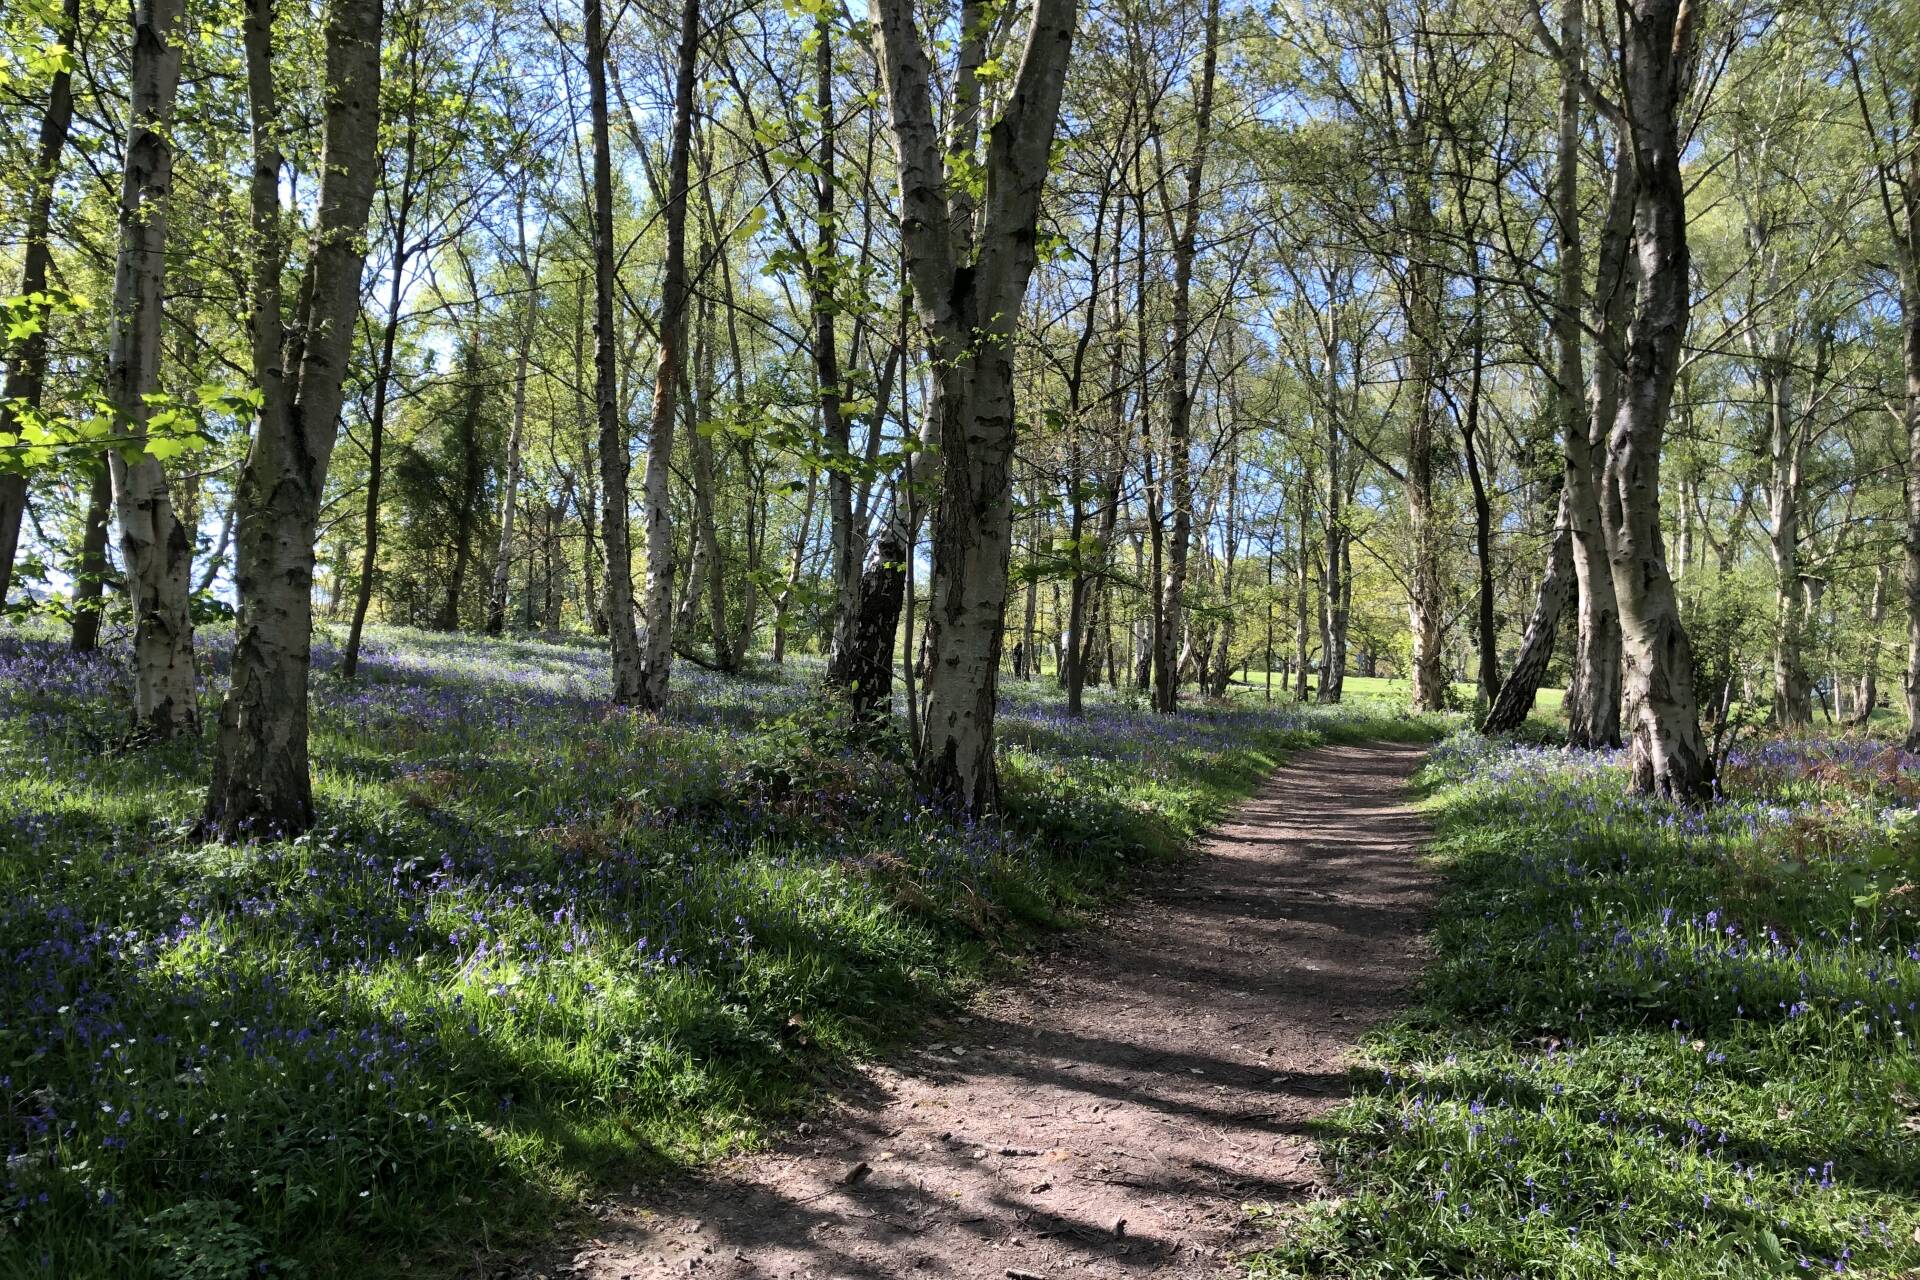 Bluebell woods and a dirt path with trees surrounding